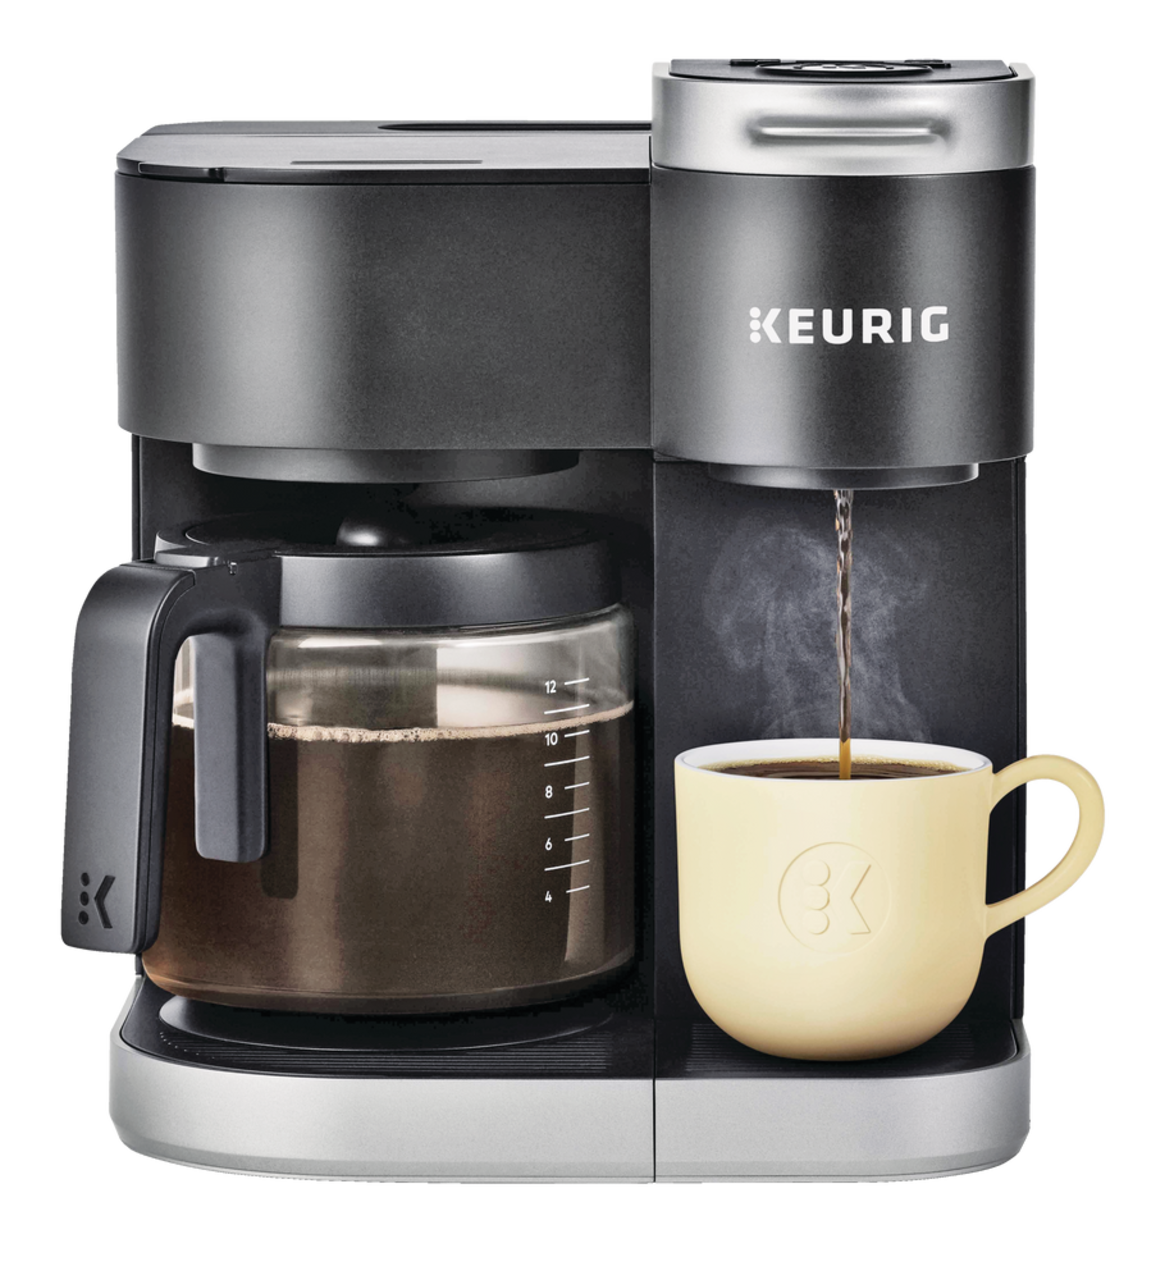 https://media-www.canadiantire.ca/product/living/kitchen/kitchen-appliances/0432718/keurig-k-duo-00f2b1bf-4083-49d9-a273-45ec01143ae3.png?imdensity=1&imwidth=640&impolicy=mZoom